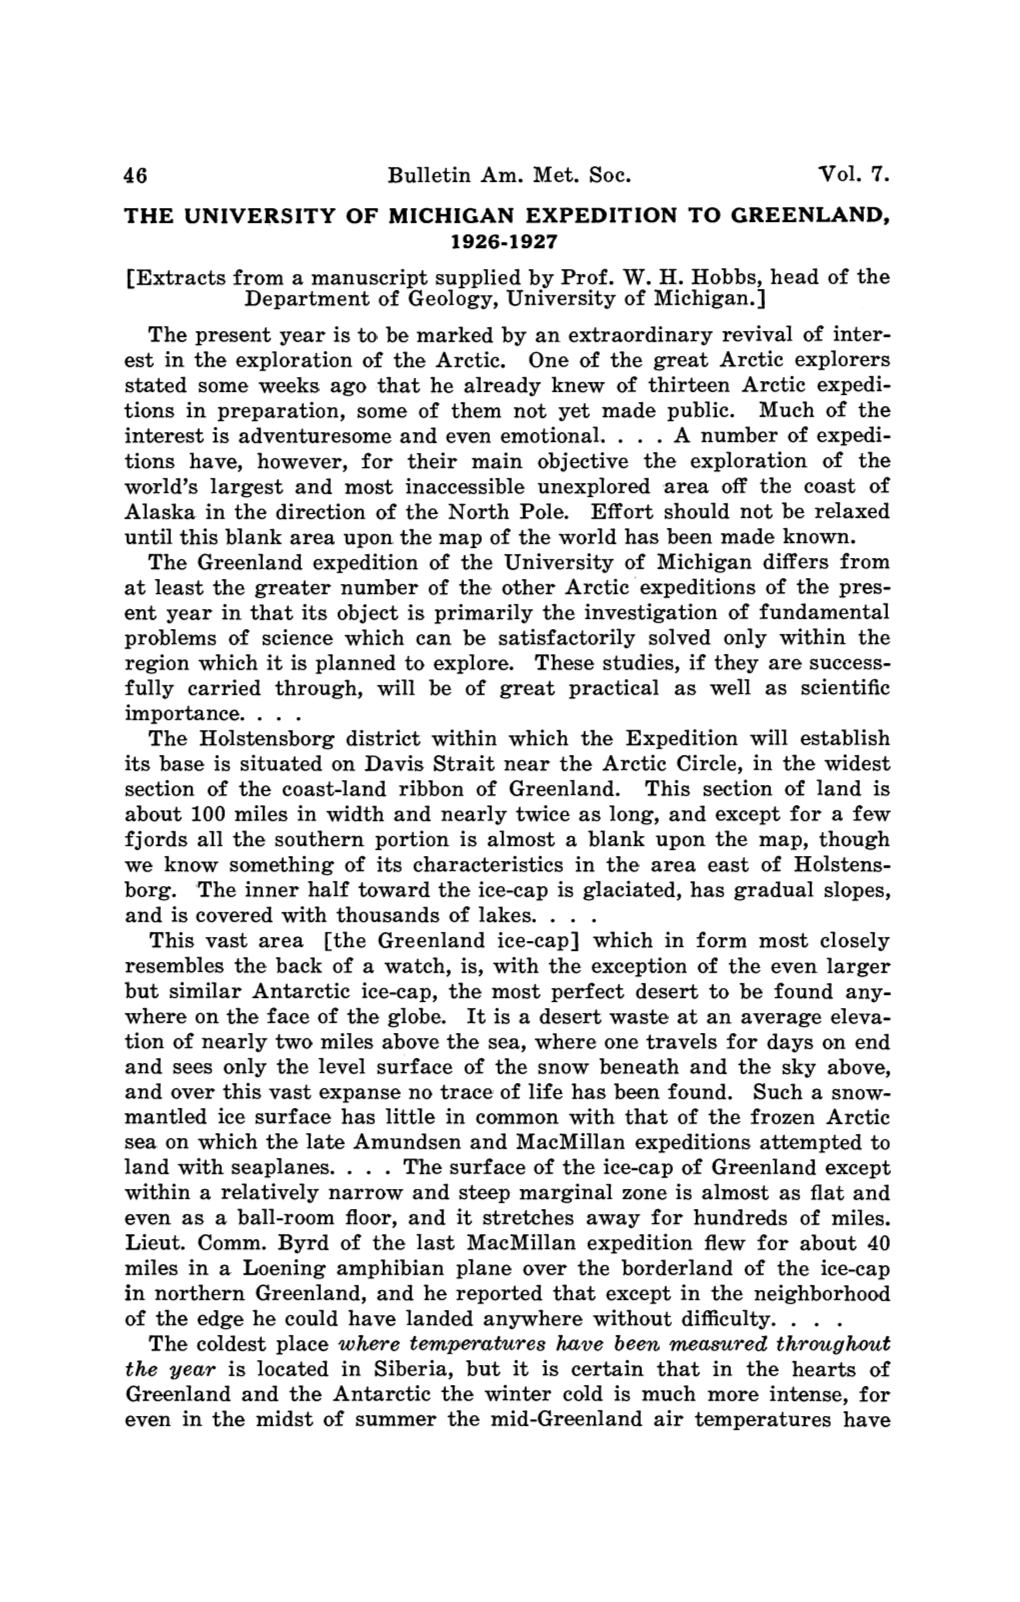 THE UNIVERSITY of MICHIGAN EXPEDITION to GREENLAND, 1926-1927 [Extracts from a Manuscript Supplied by Prof